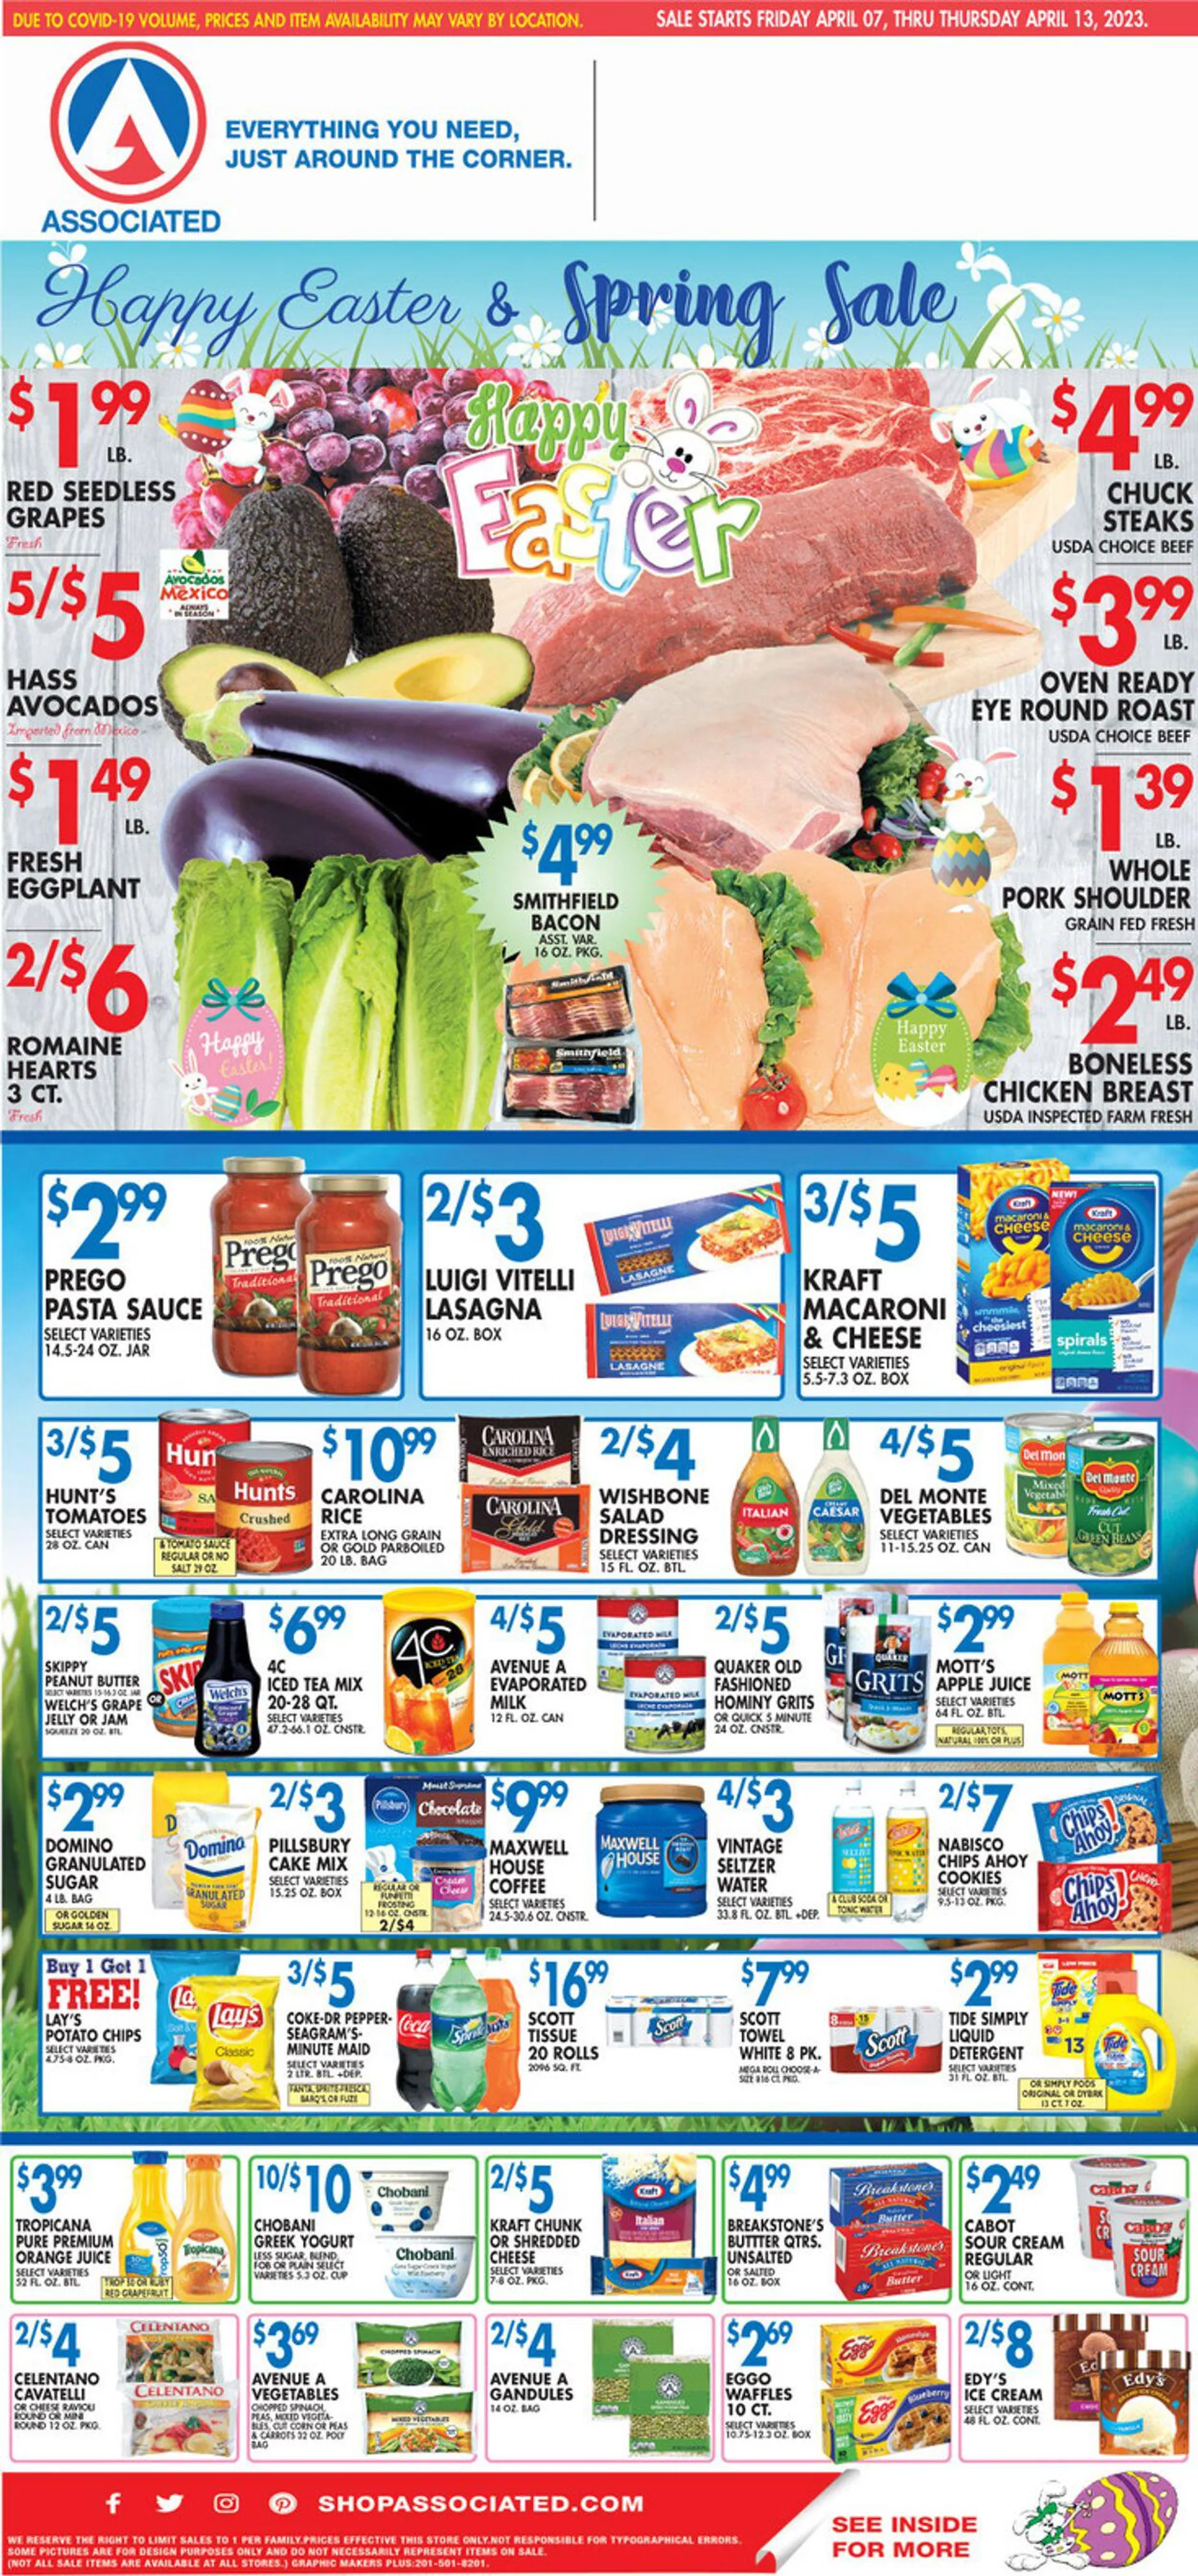 Associated Supermarkets Current weekly ad - 1